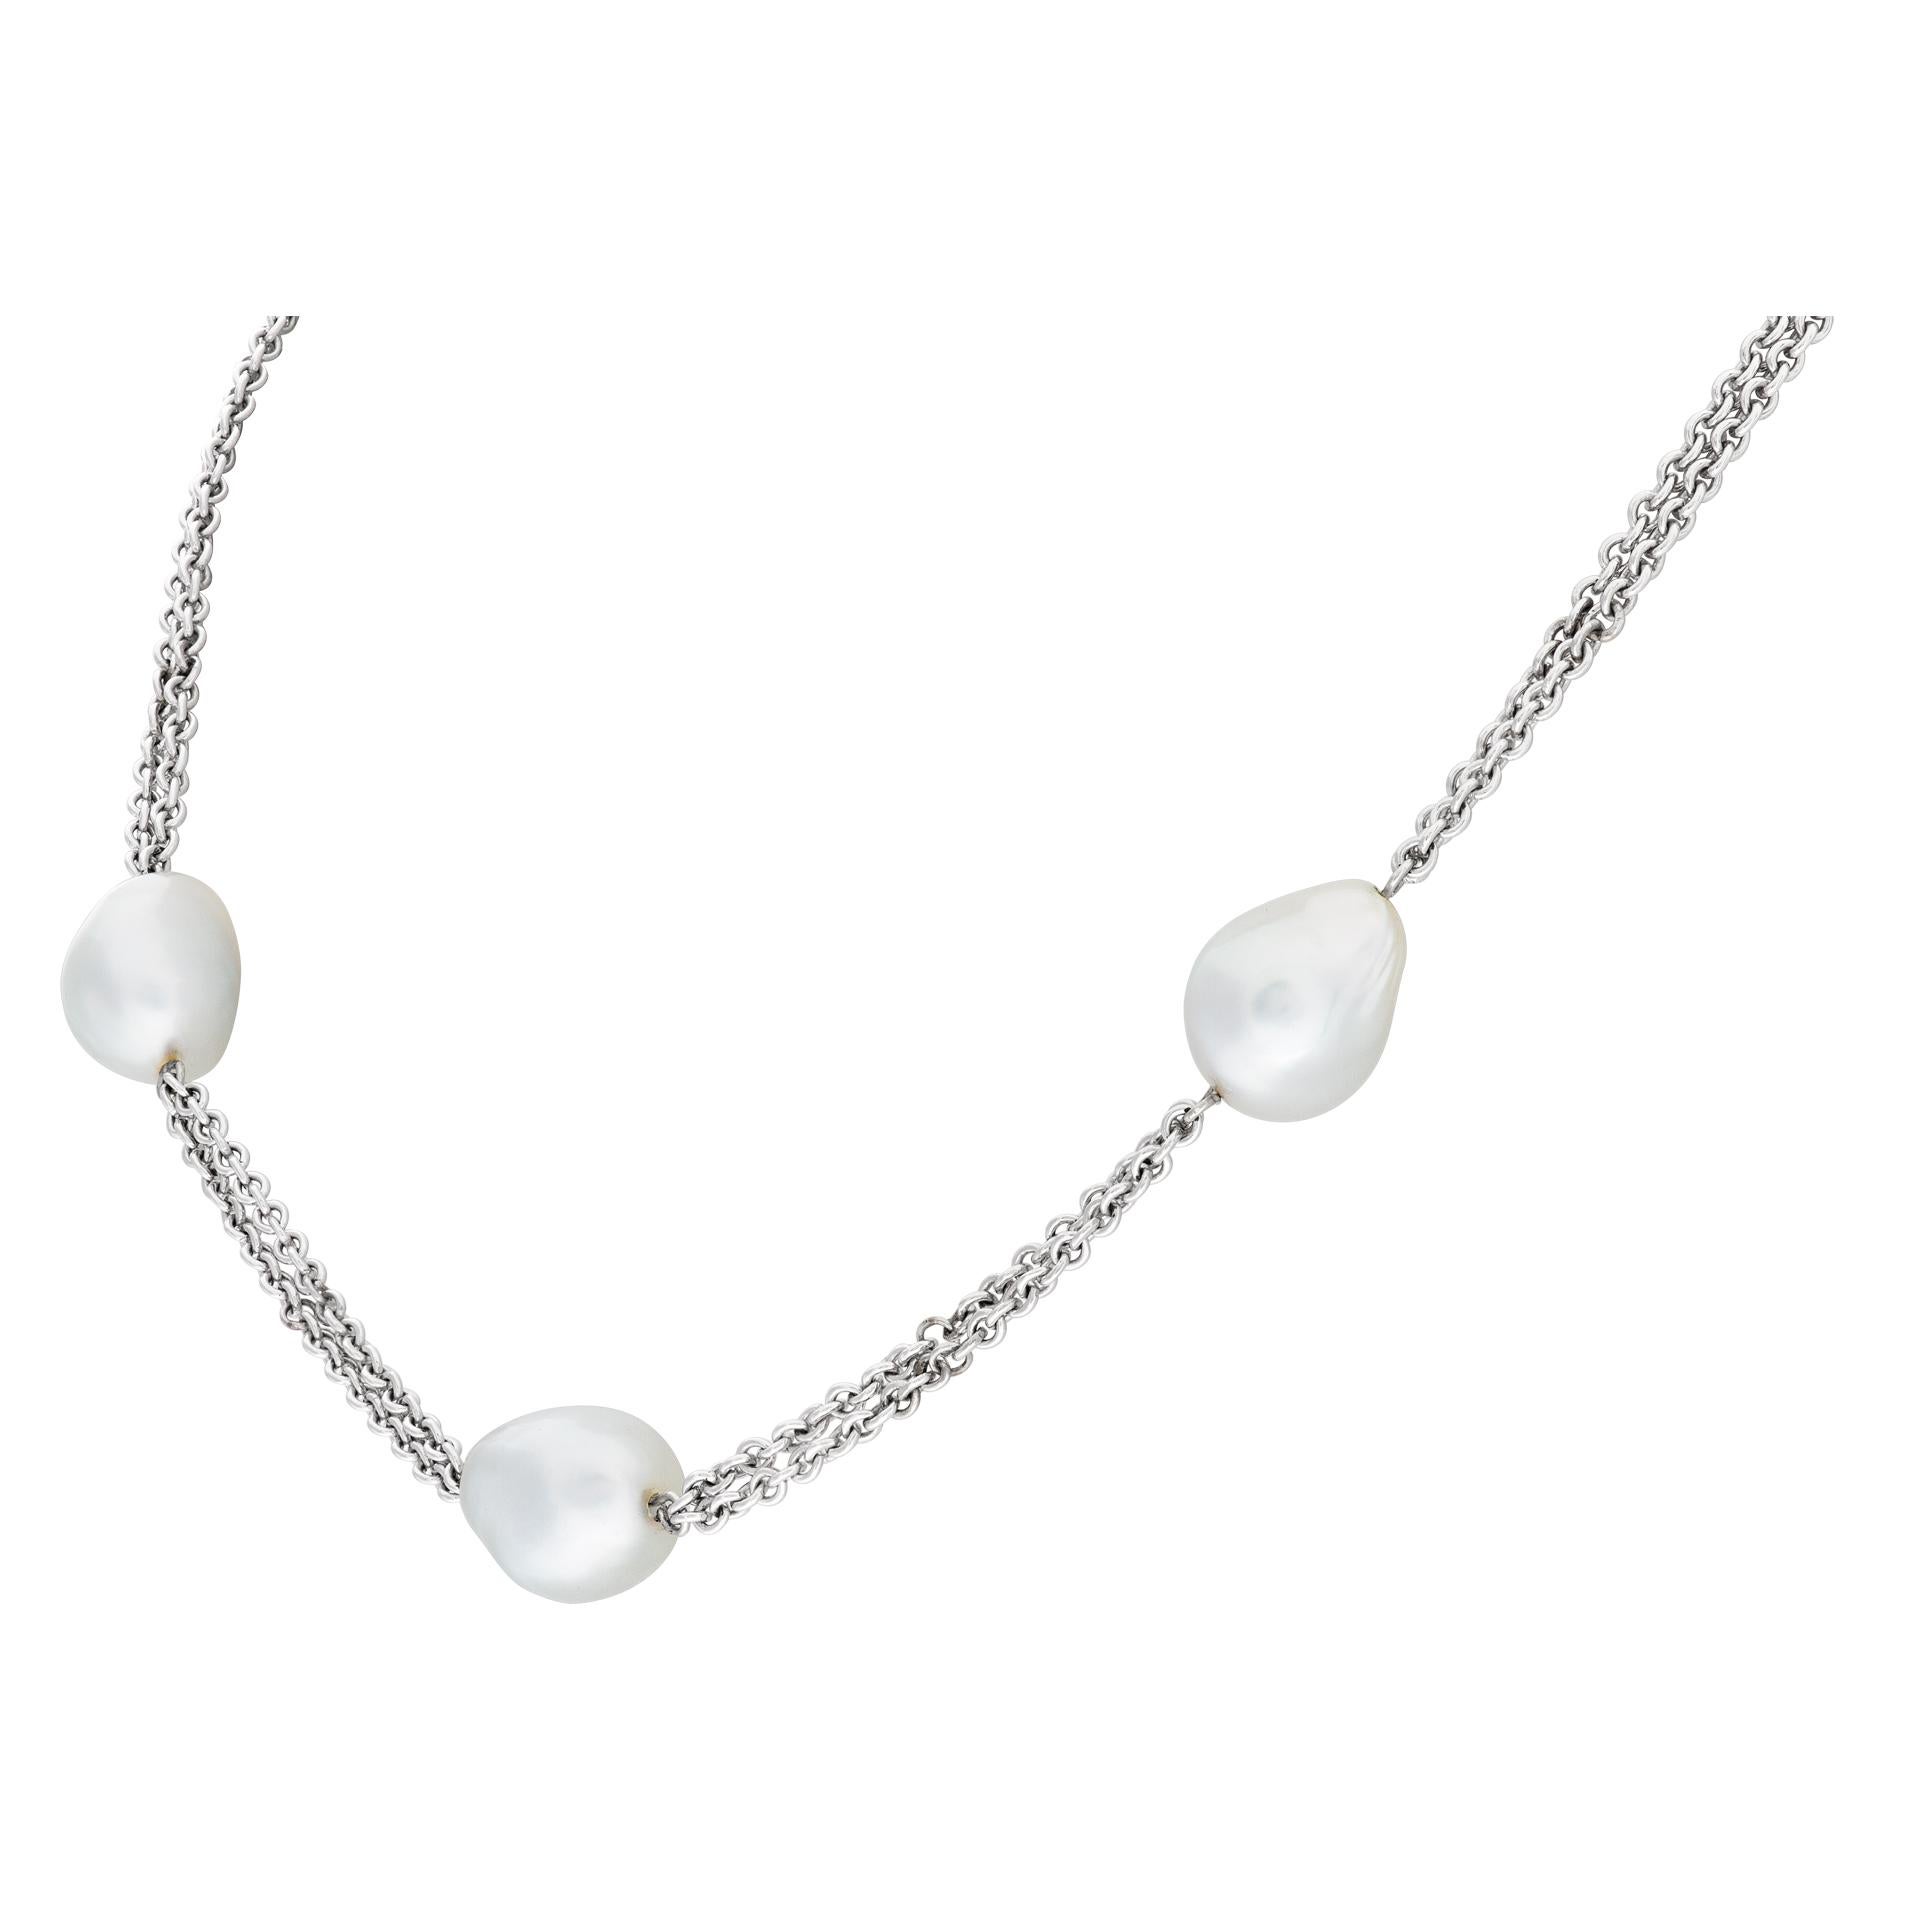 South Sea Pearl Necklace on 18k White Gold Chain In Excellent Condition For Sale In Surfside, FL